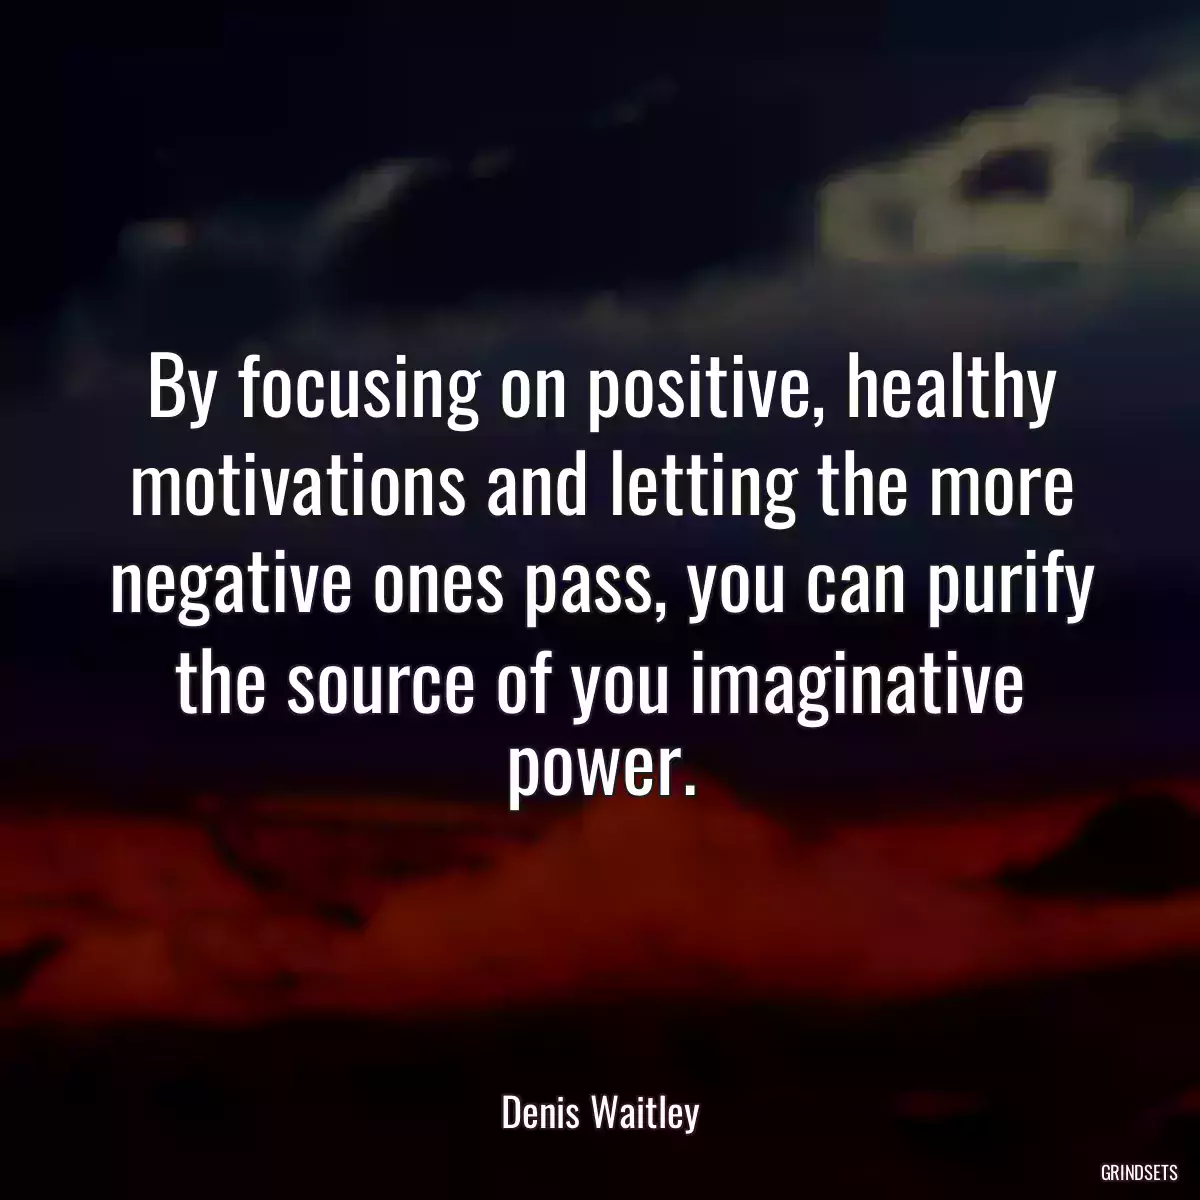 By focusing on positive, healthy motivations and letting the more negative ones pass, you can purify the source of you imaginative power.